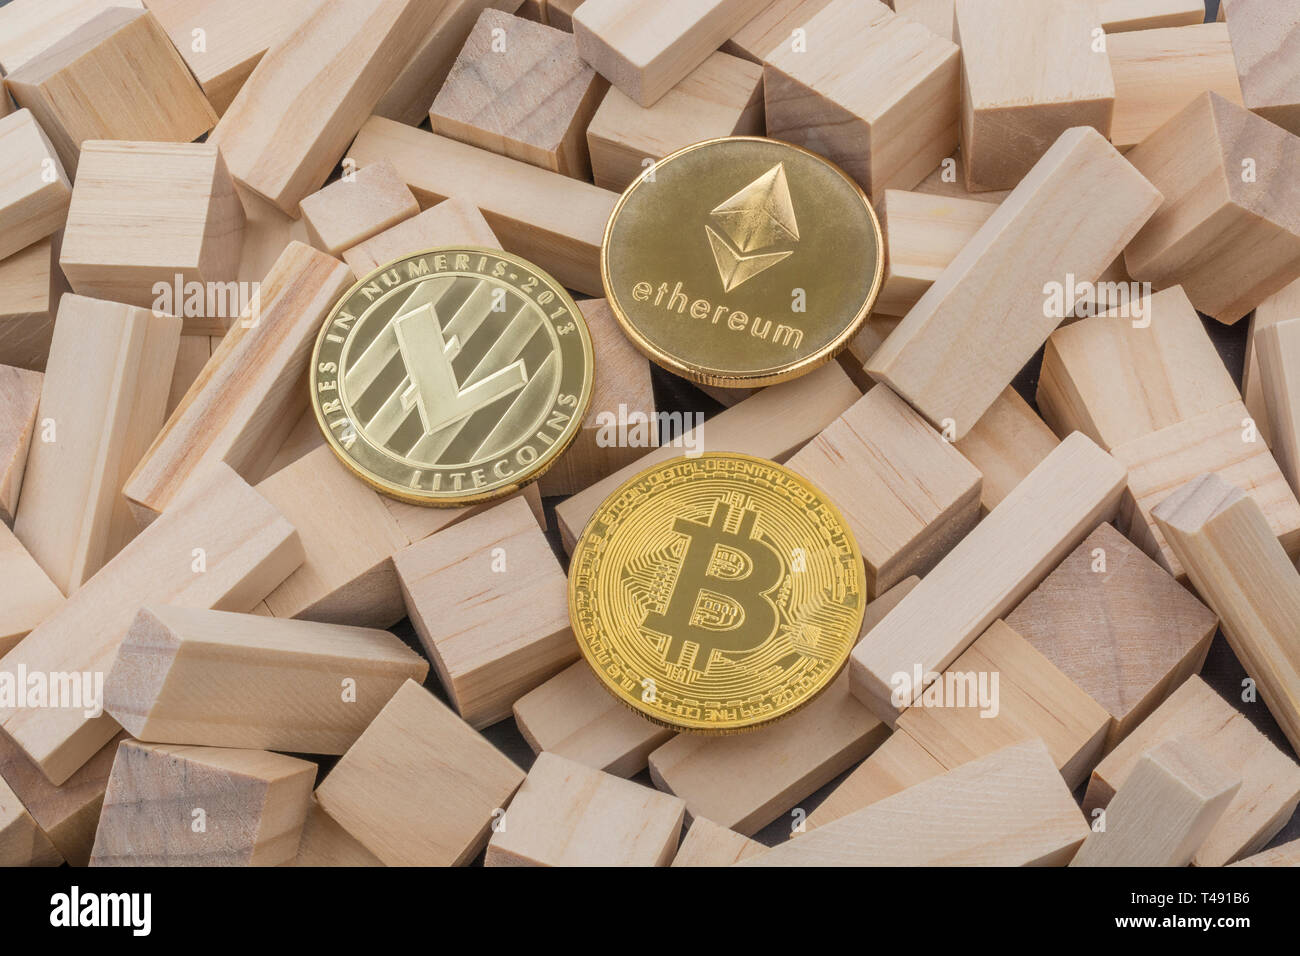 Ethereum, Litecoin, Bitcoin tokens on small wooden bricks. For FTX cryptocurrency crash, Bitcoin crash Litecoin crash Ethereum crash, SVB bank crash. Stock Photo